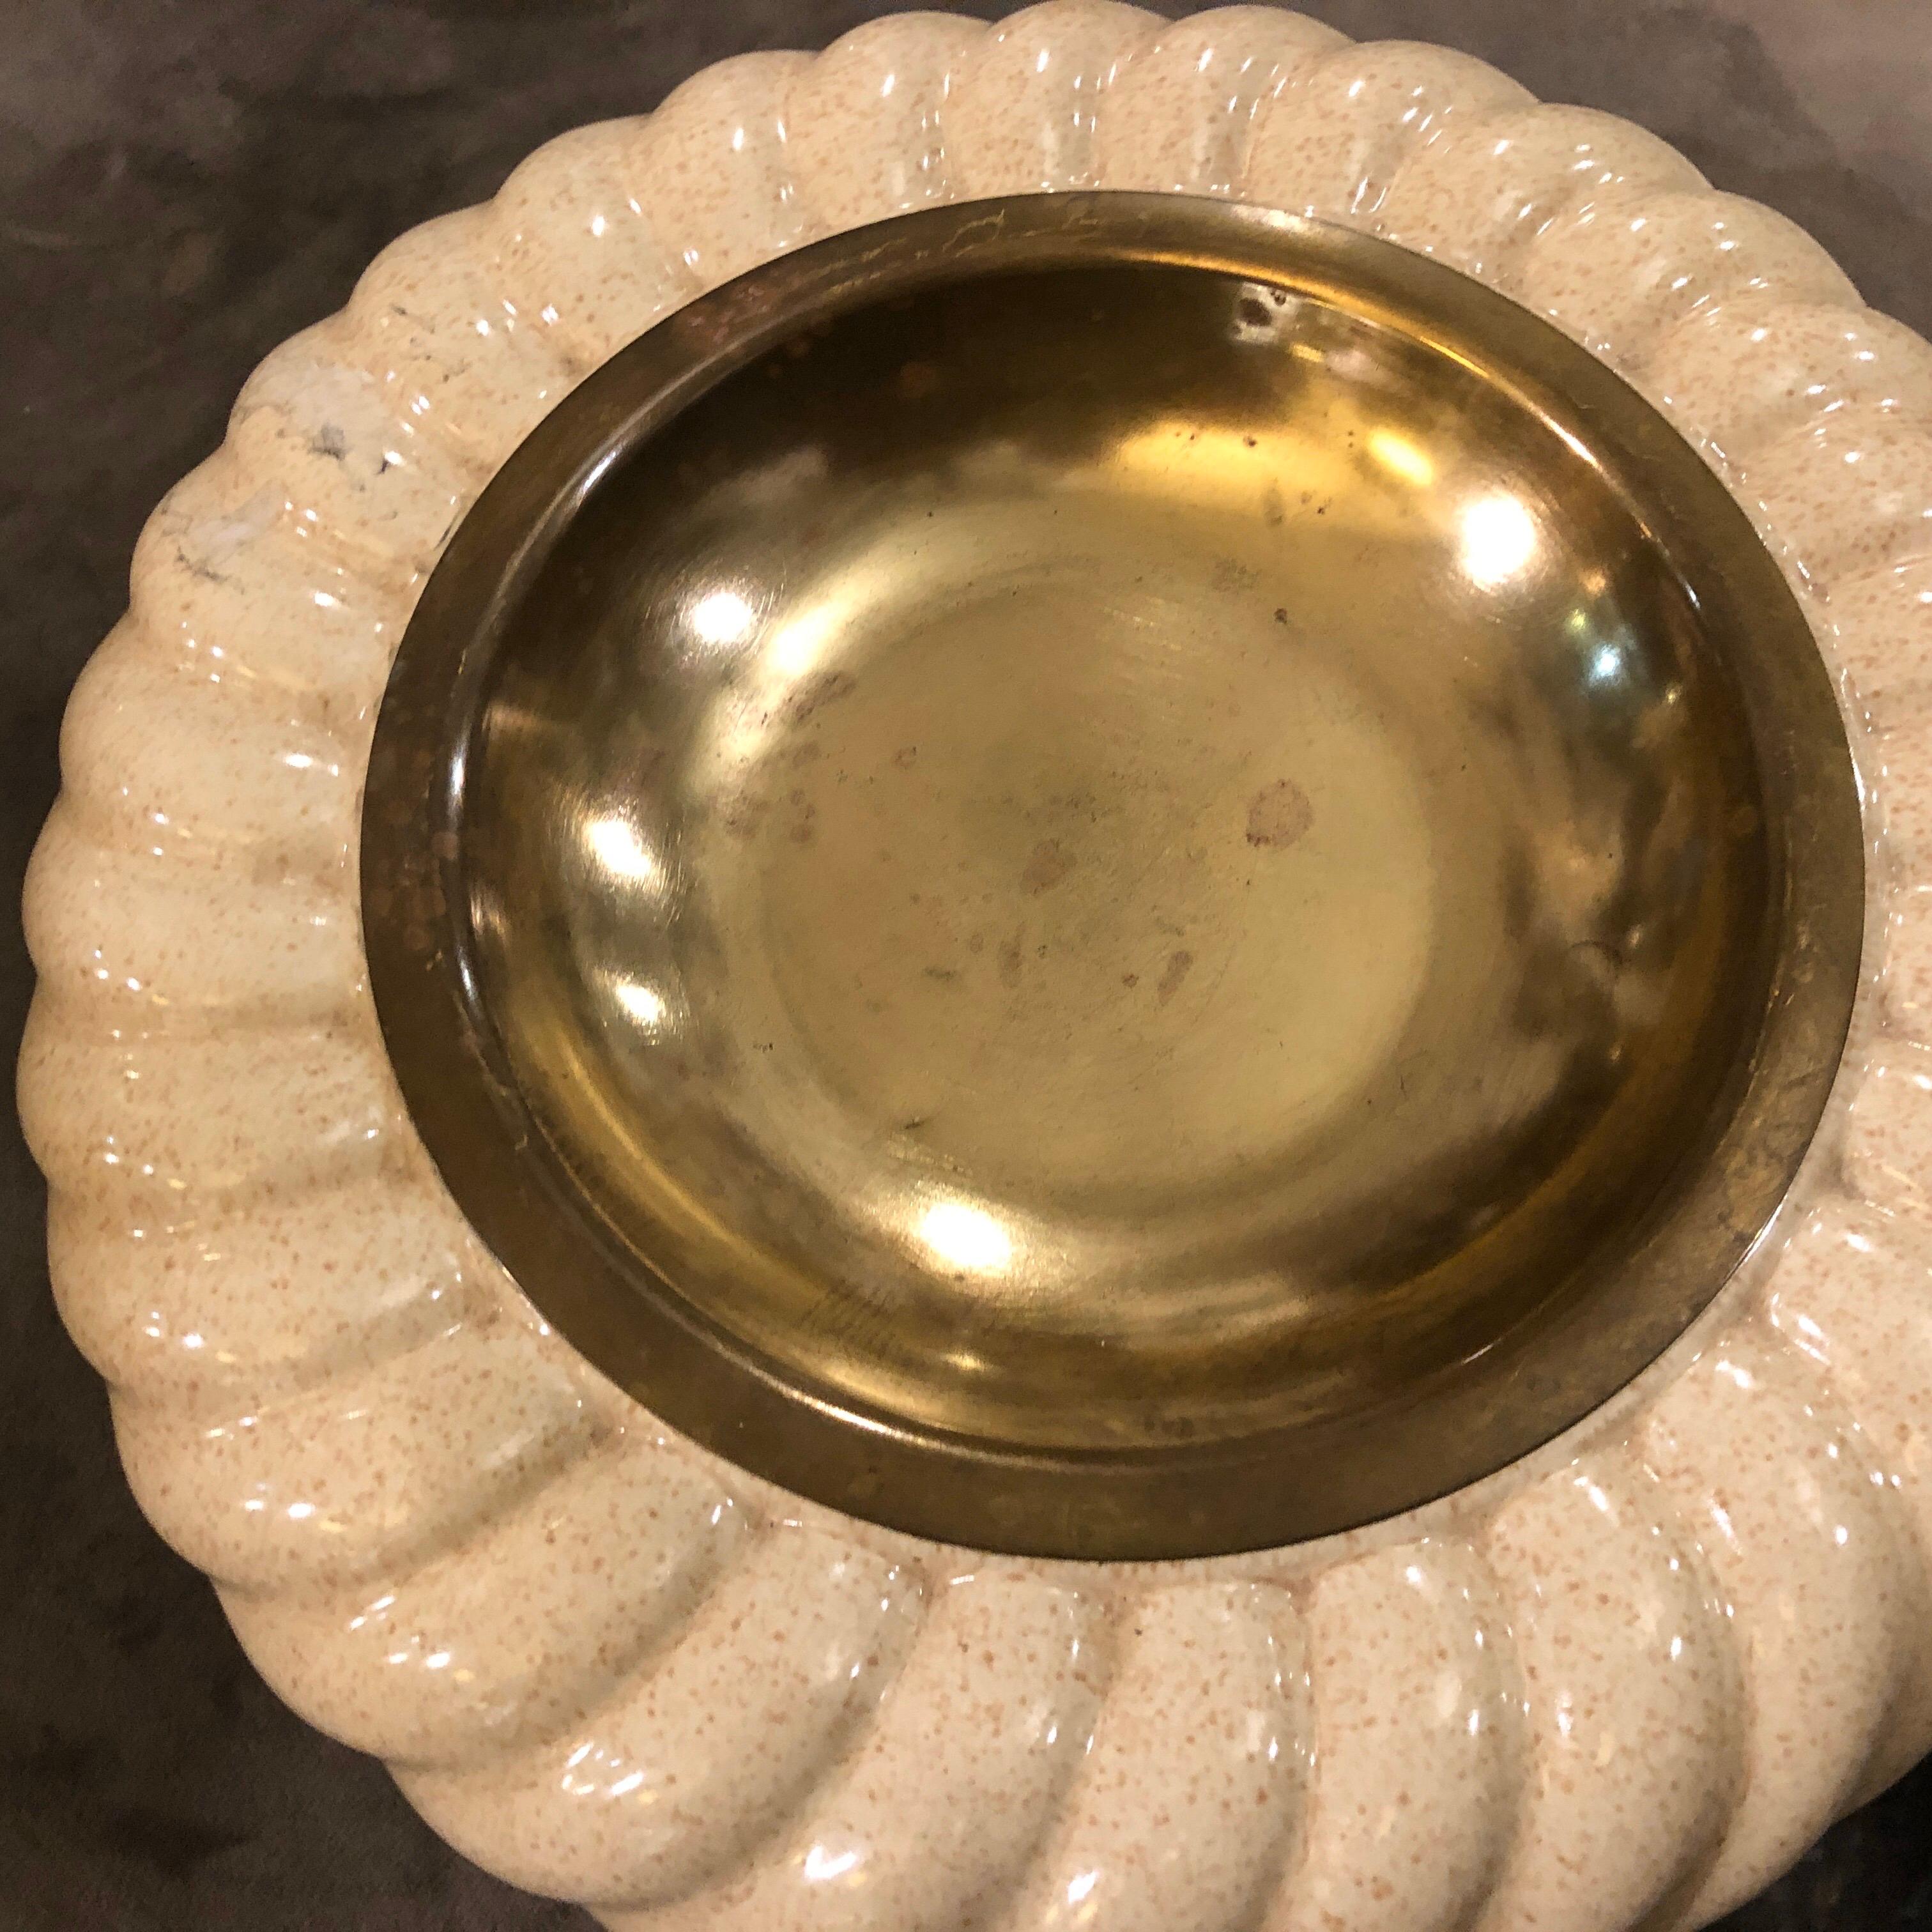 Iconic Tommaso Barbi ashtray made in Italy in the 1970s, porcelain has signs of age, brass is in original patina. It's marked on the bottom.